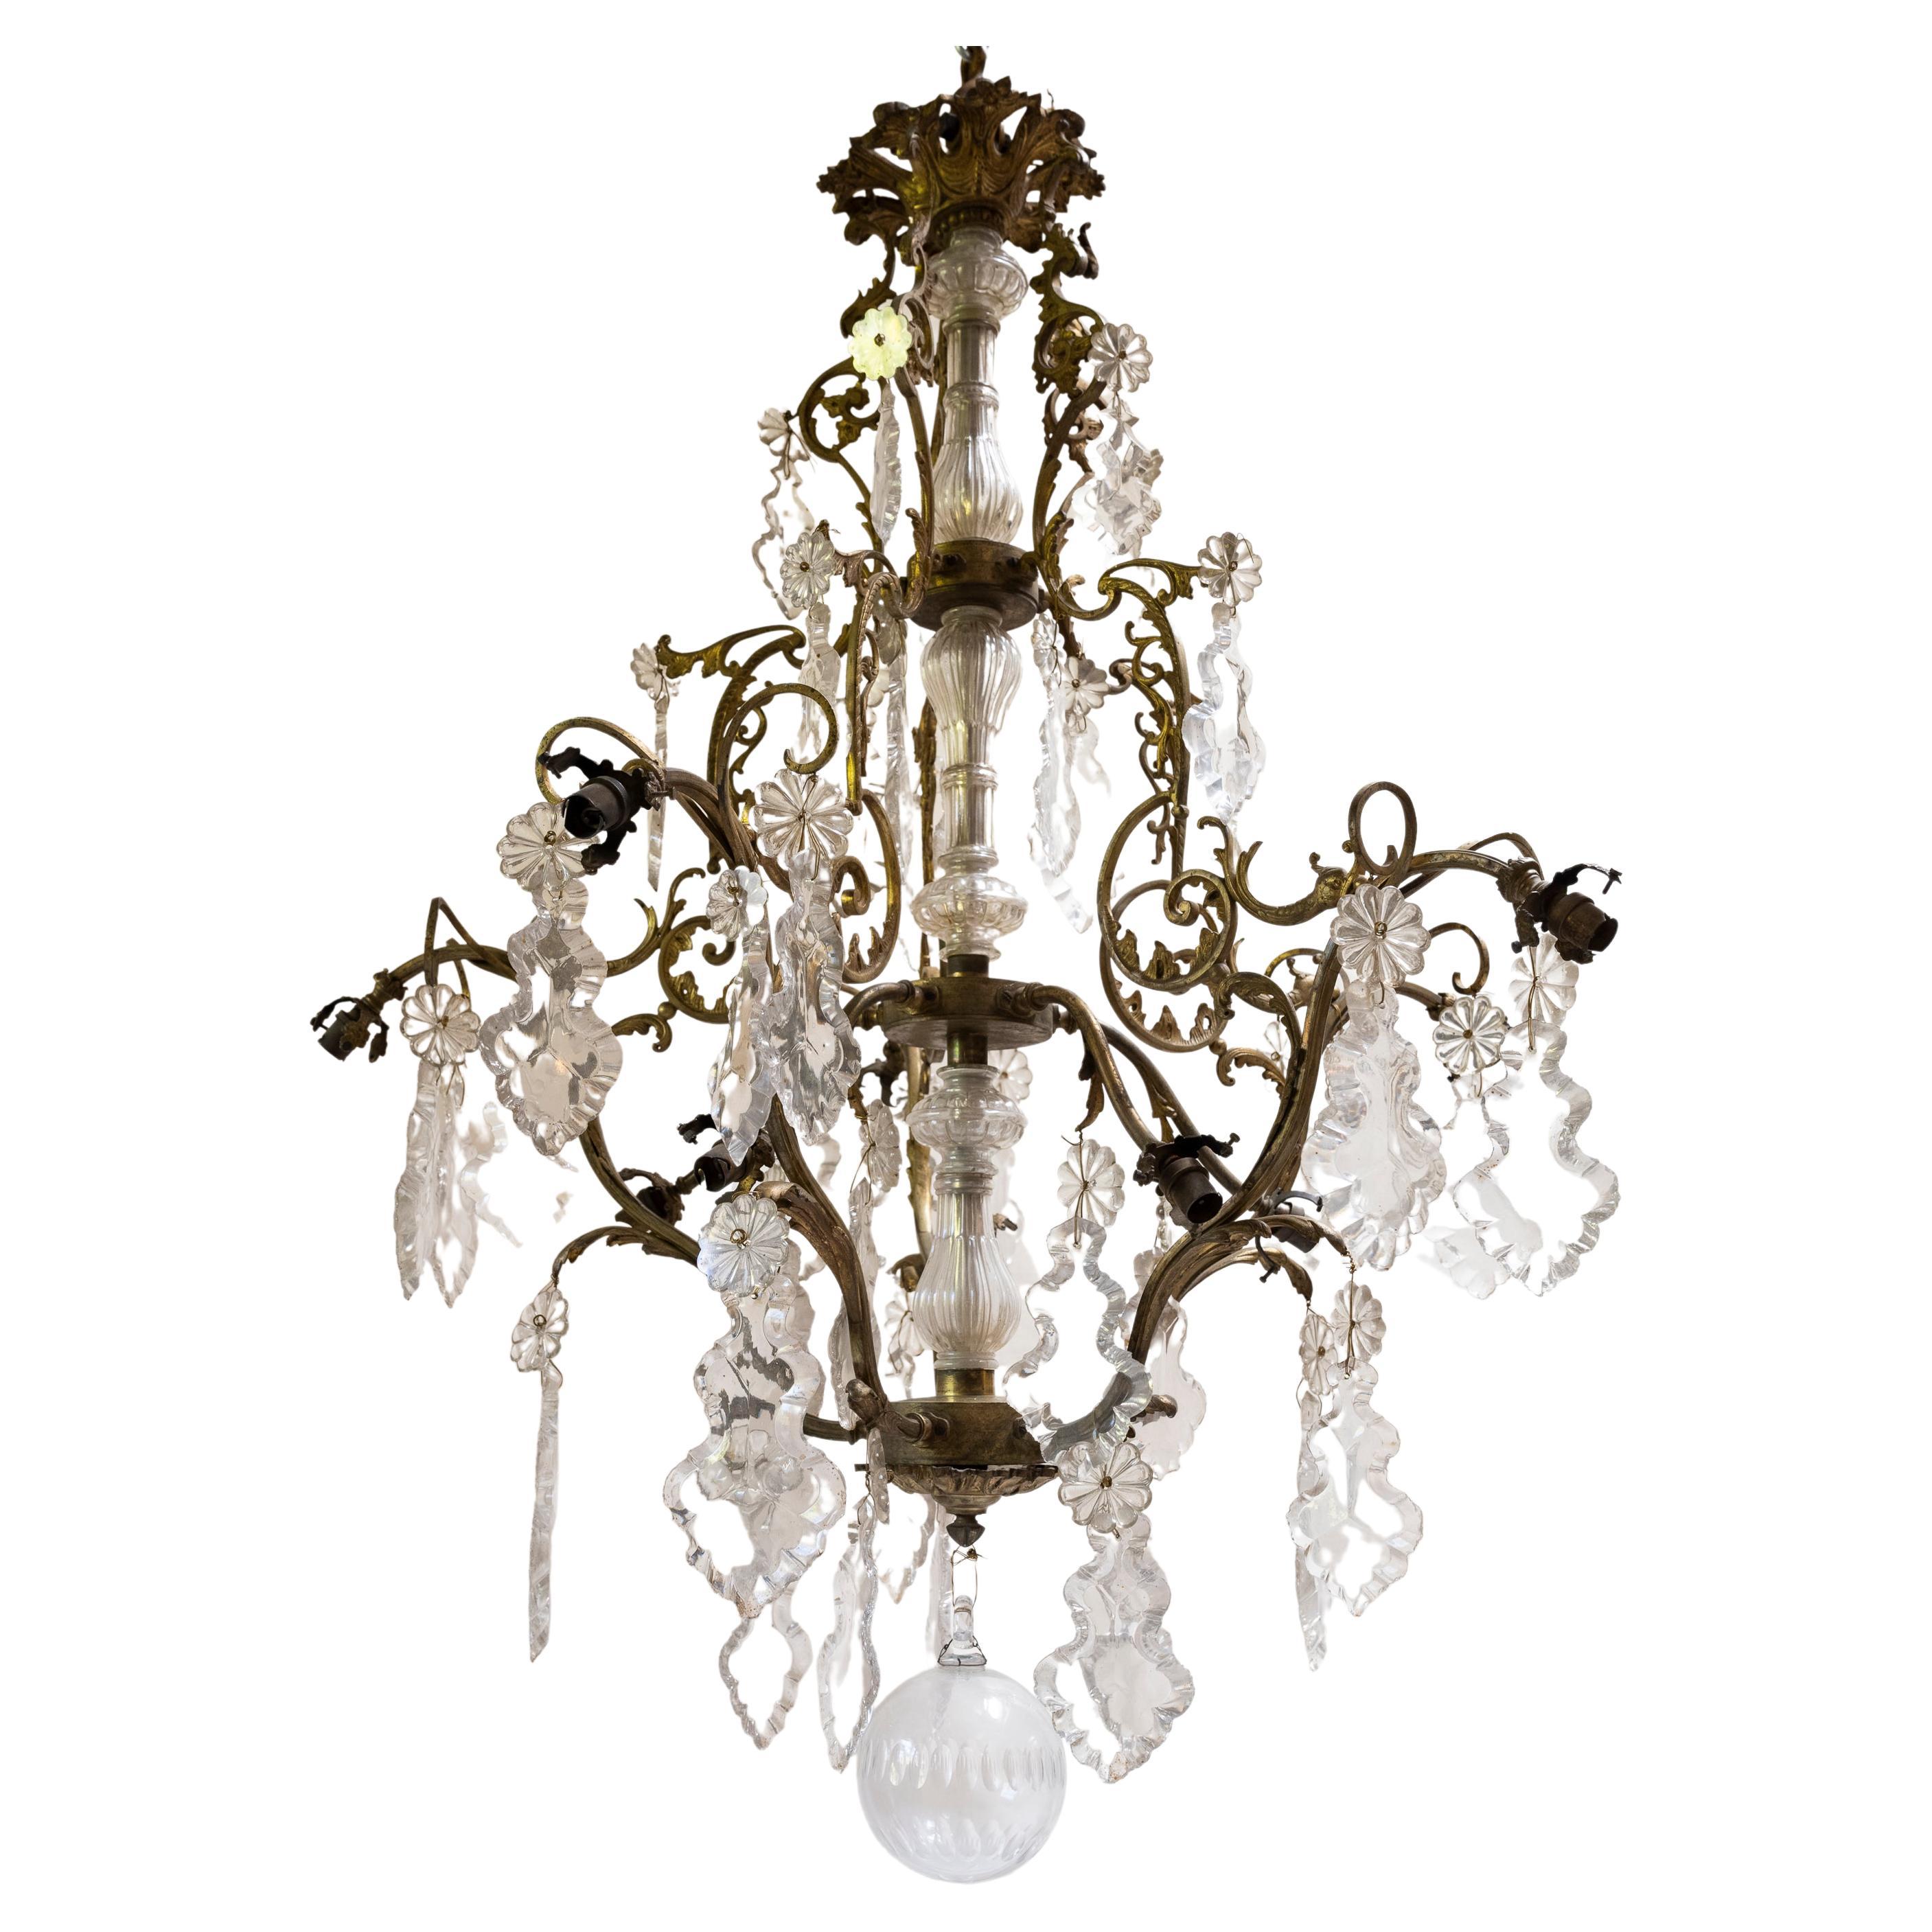 19th Century French Iron & Crystal Chandelier